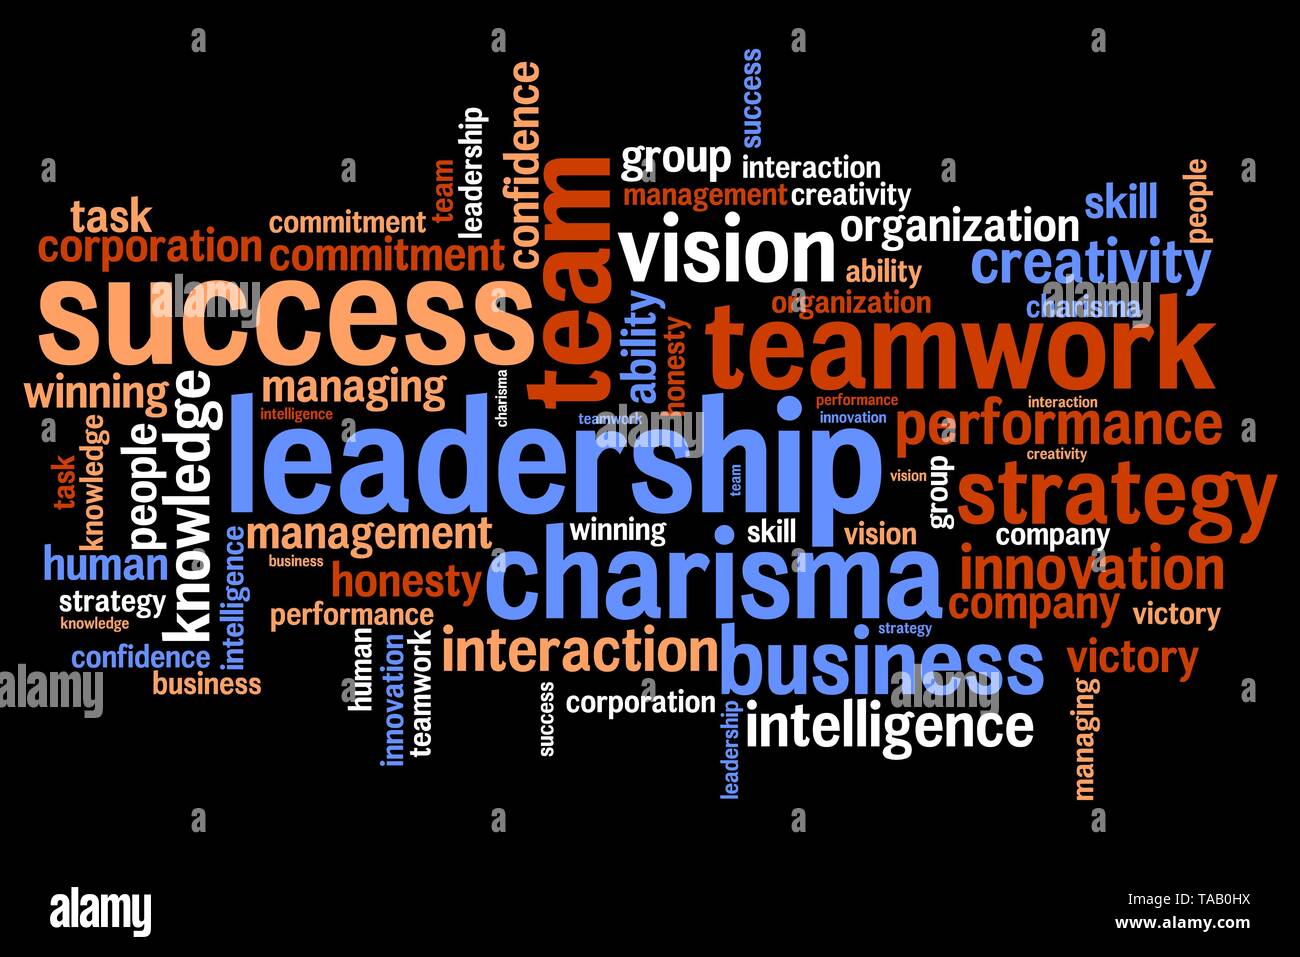 Leadership and teamwork word cloud illustration. Word collage concept. Stock Photo